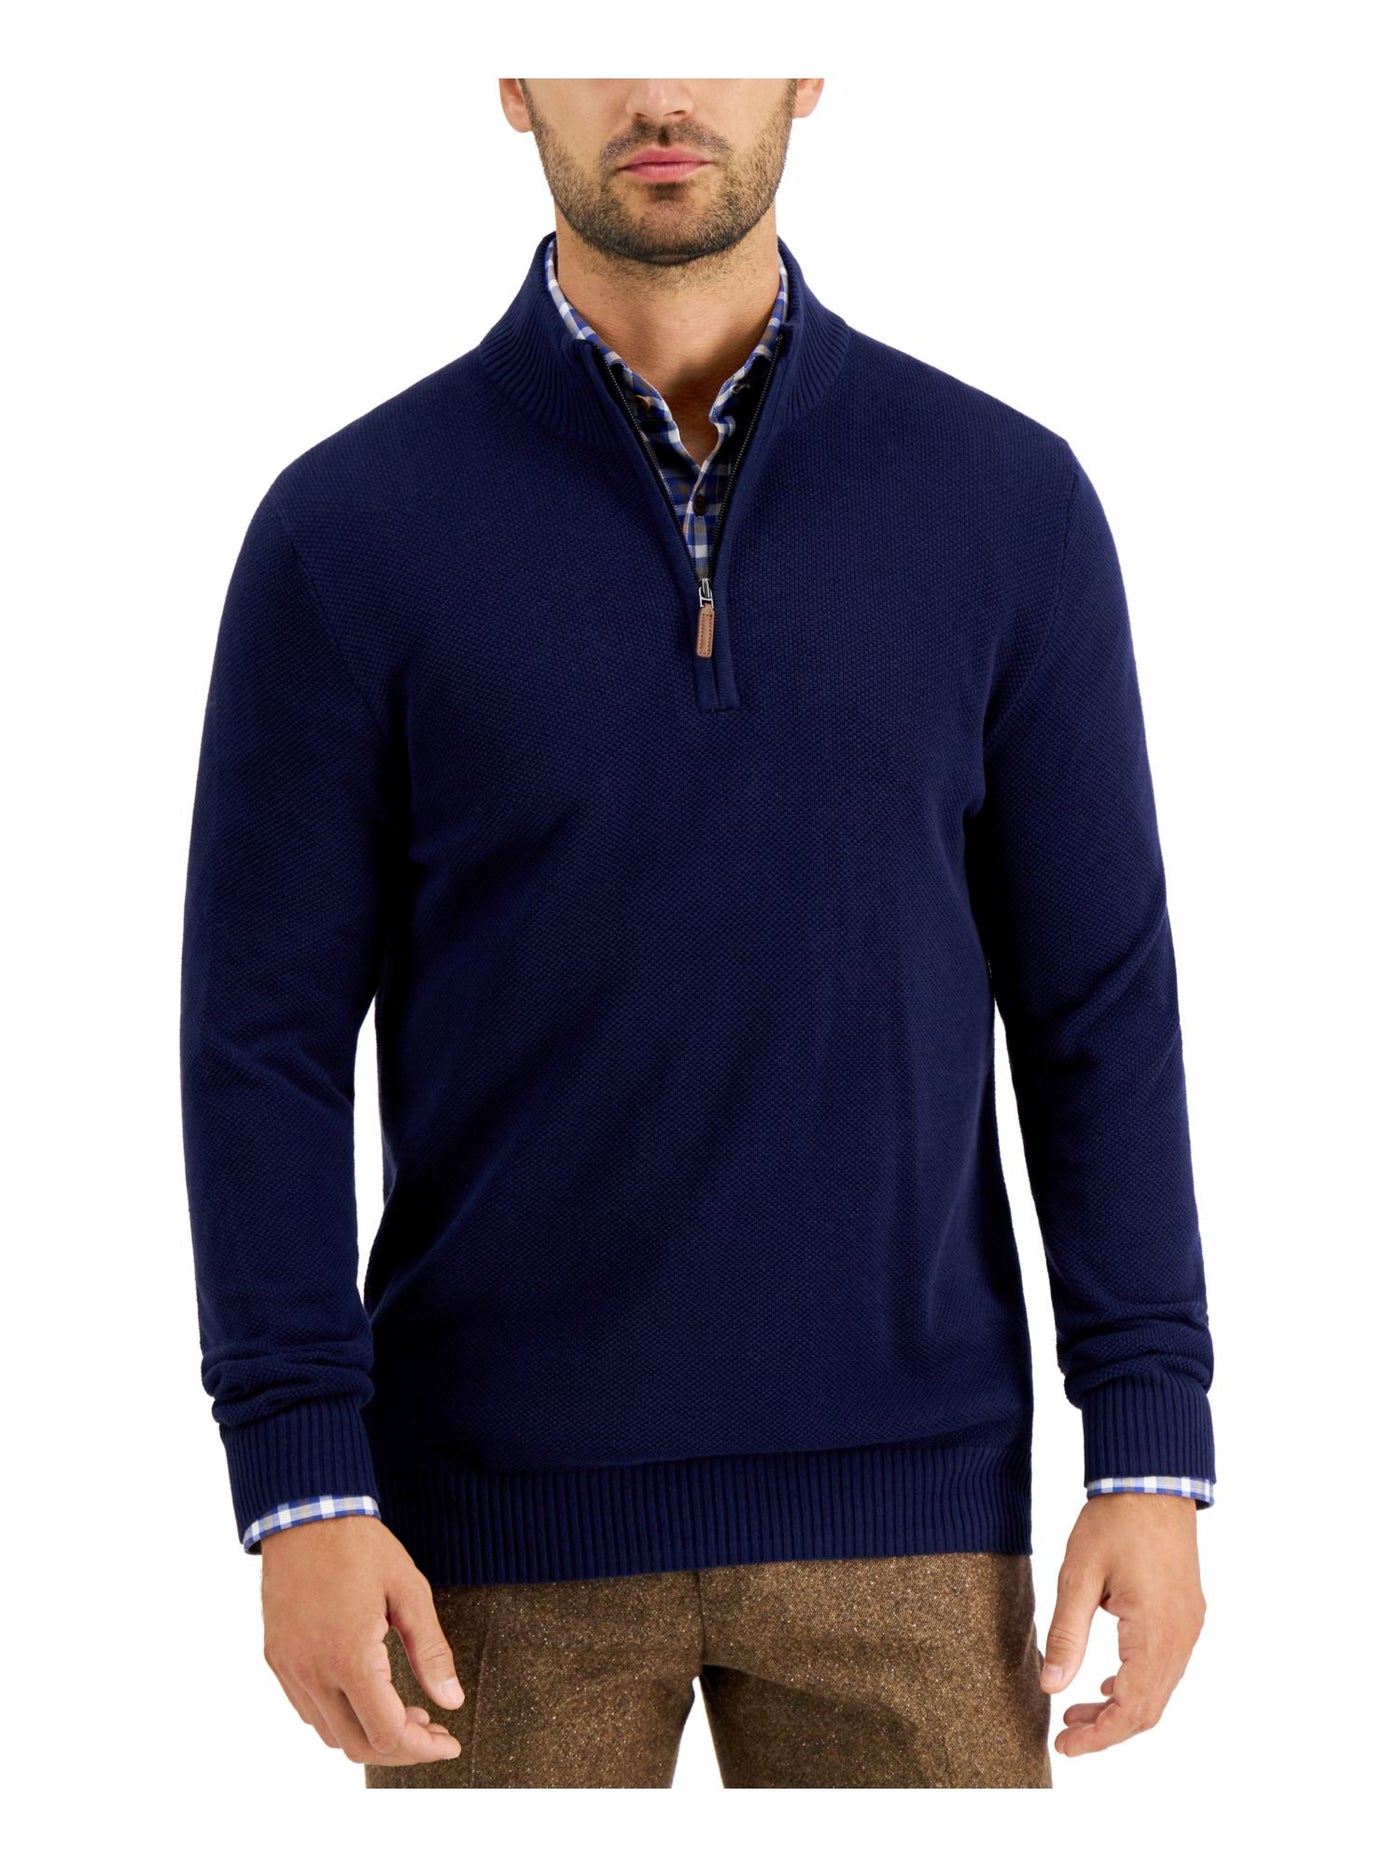 CLUBROOM Mens Navy Mock Neck Classic Fit Quarter-Zip Faux Leather Pullover Sweater S